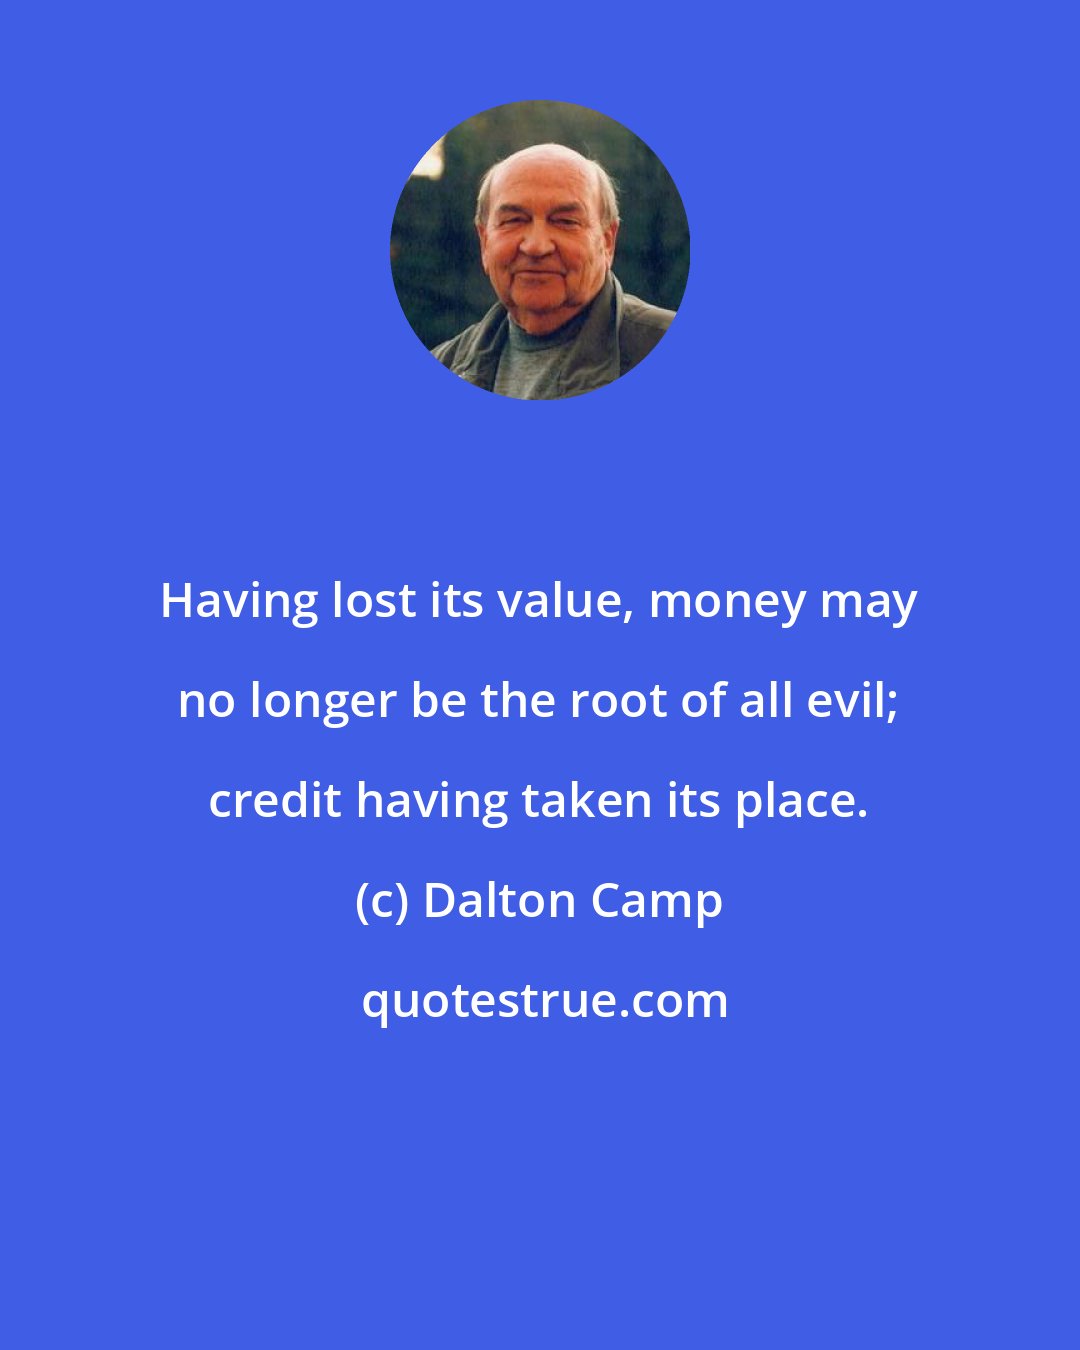 Dalton Camp: Having lost its value, money may no longer be the root of all evil; credit having taken its place.